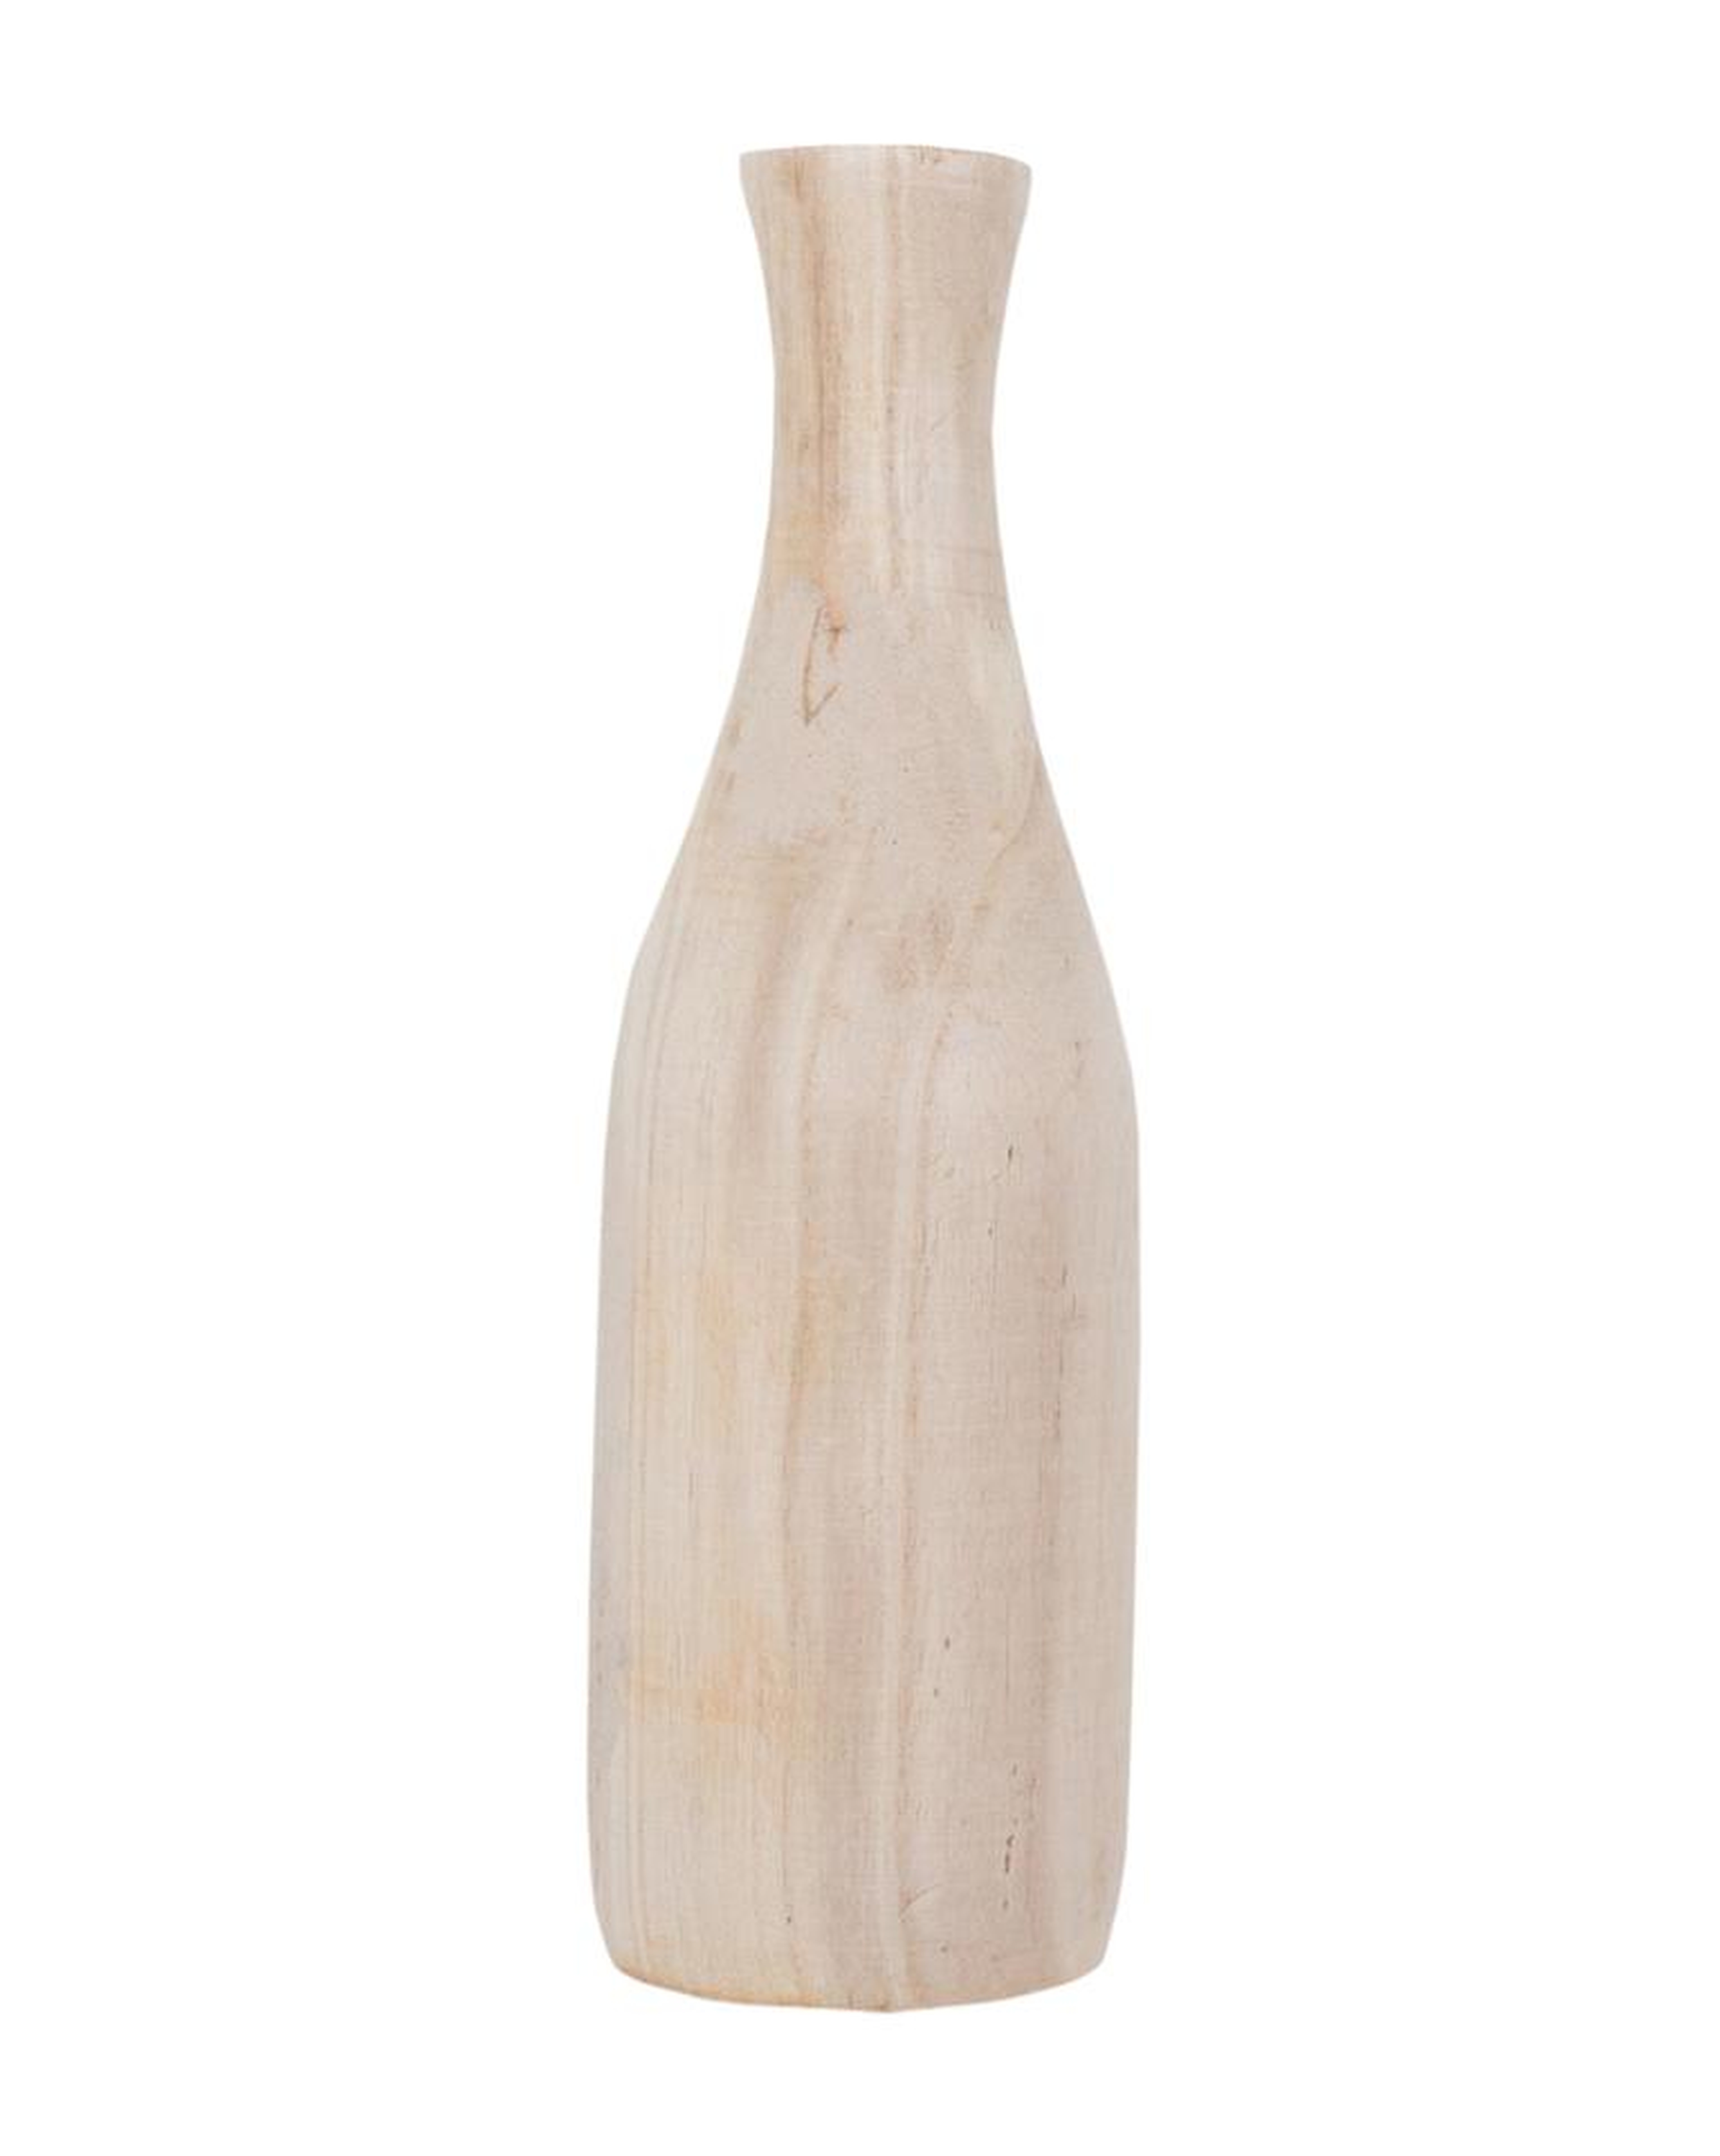 WOODEN VASE SCULPTURE, TALL - McGee & Co.